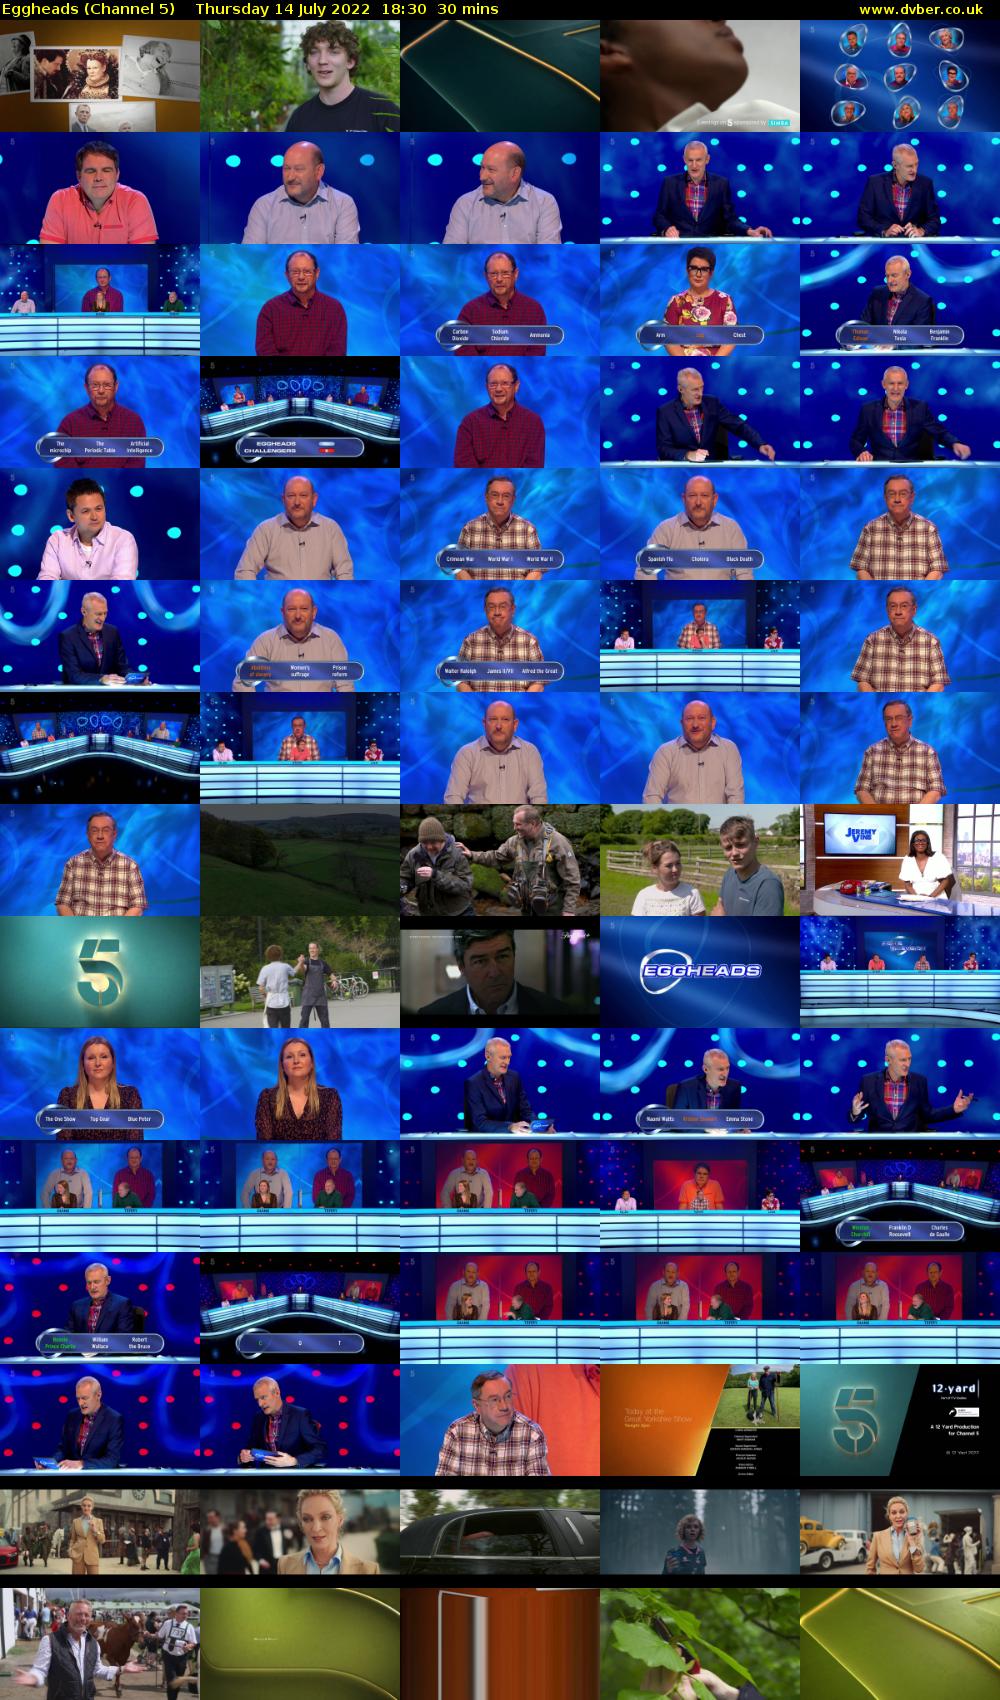 Eggheads (Channel 5) Thursday 14 July 2022 18:30 - 19:00